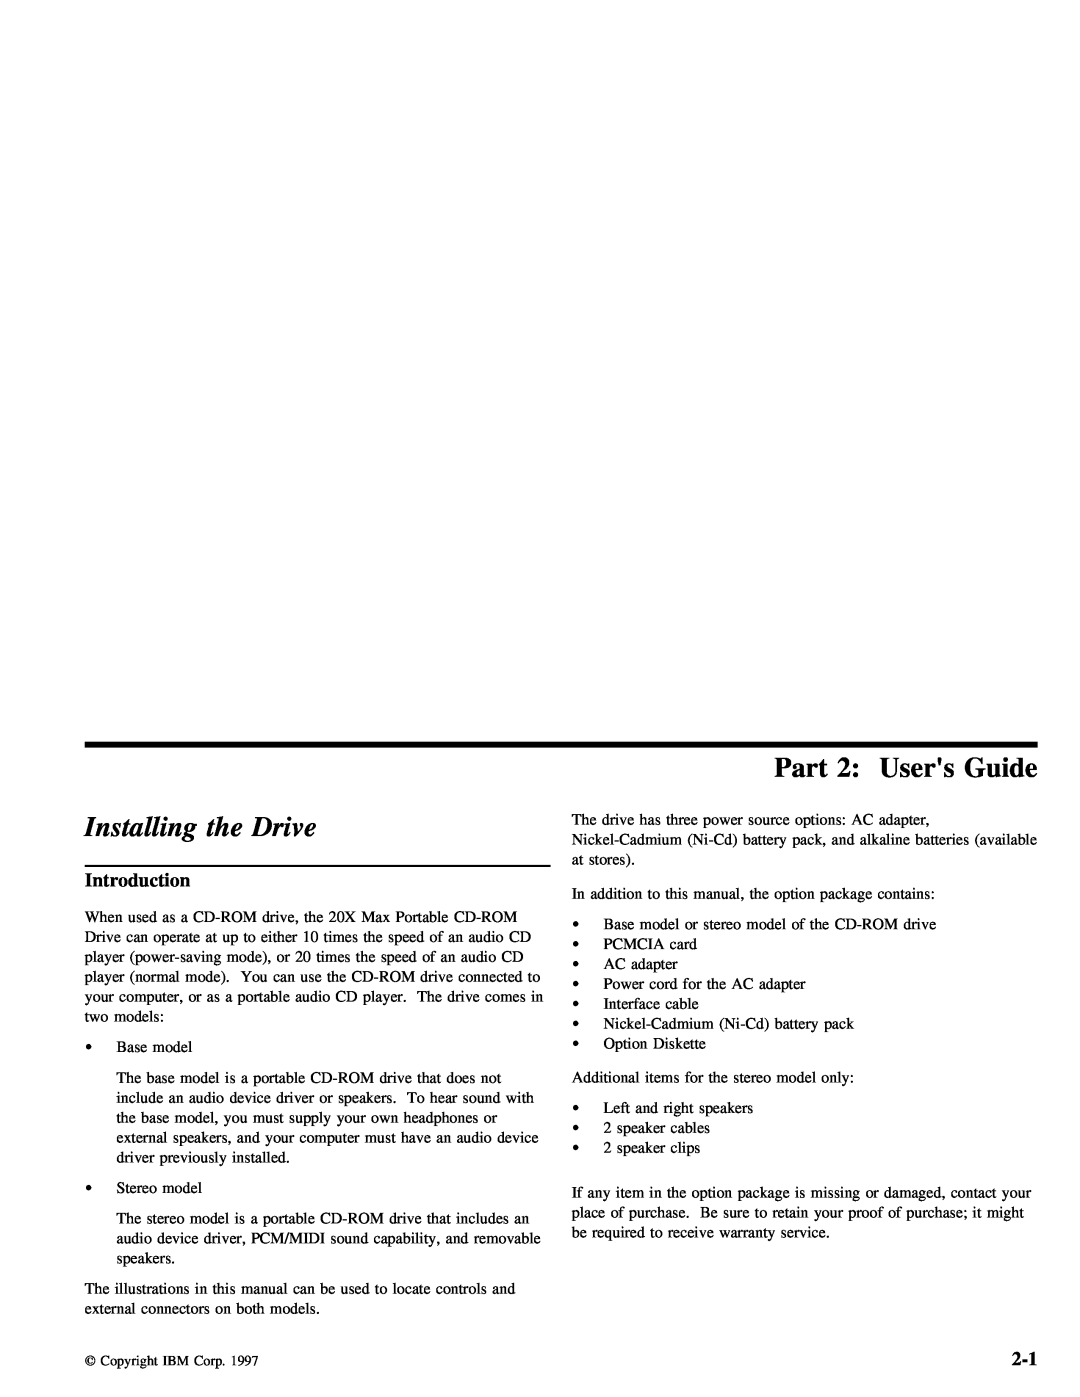 Lenovo 4304493 manual Part 2 Users Guide, Installing the Drive, Introduction 